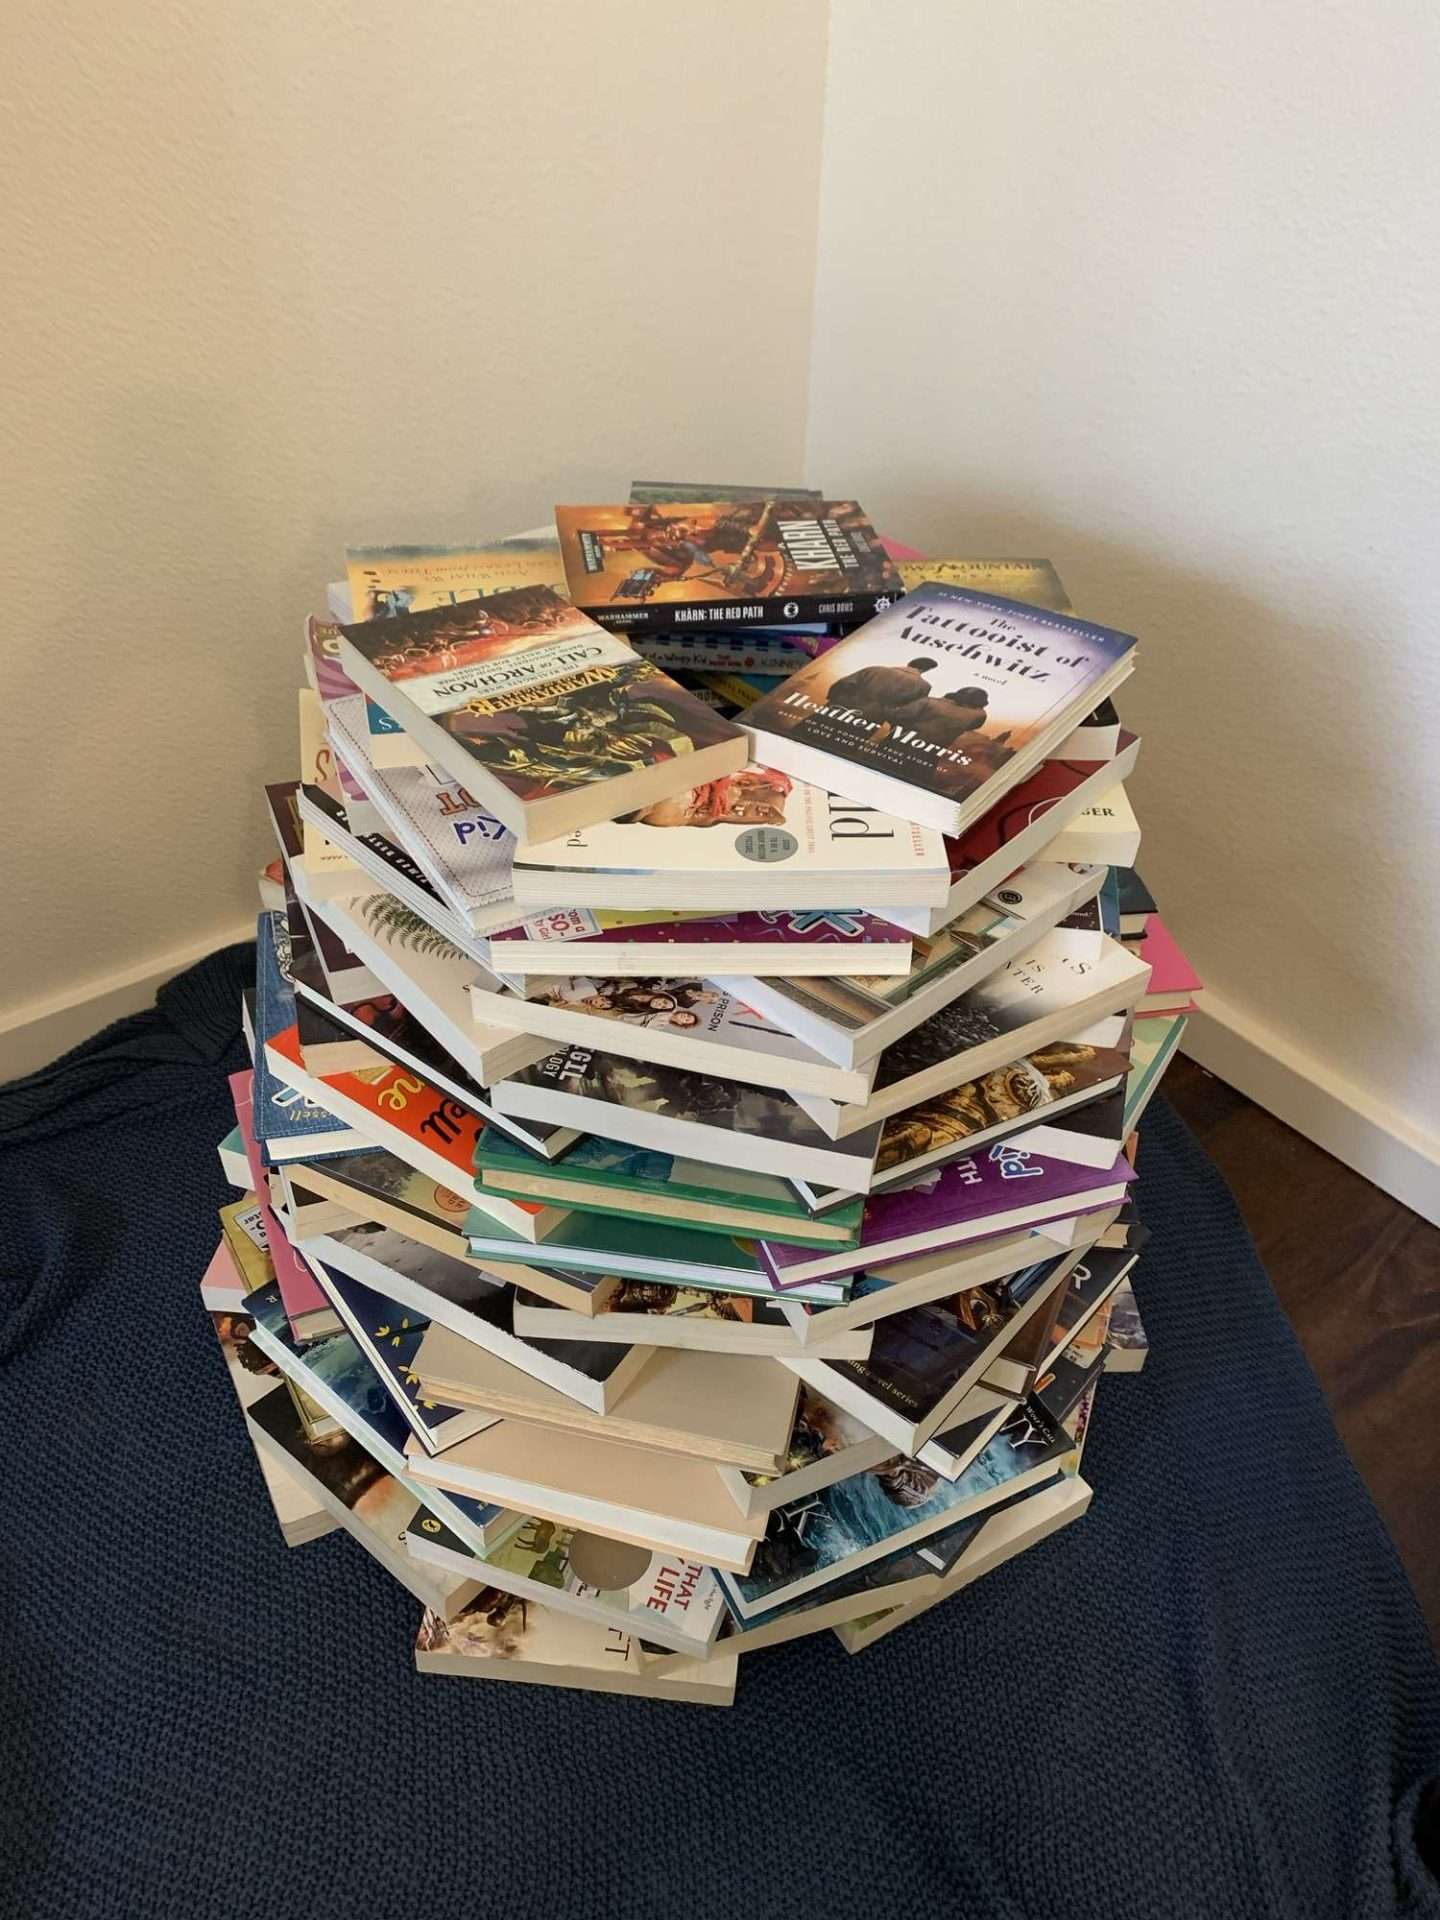 Eventually your book stack will taper to only fit 3 books in a triangle on the top.